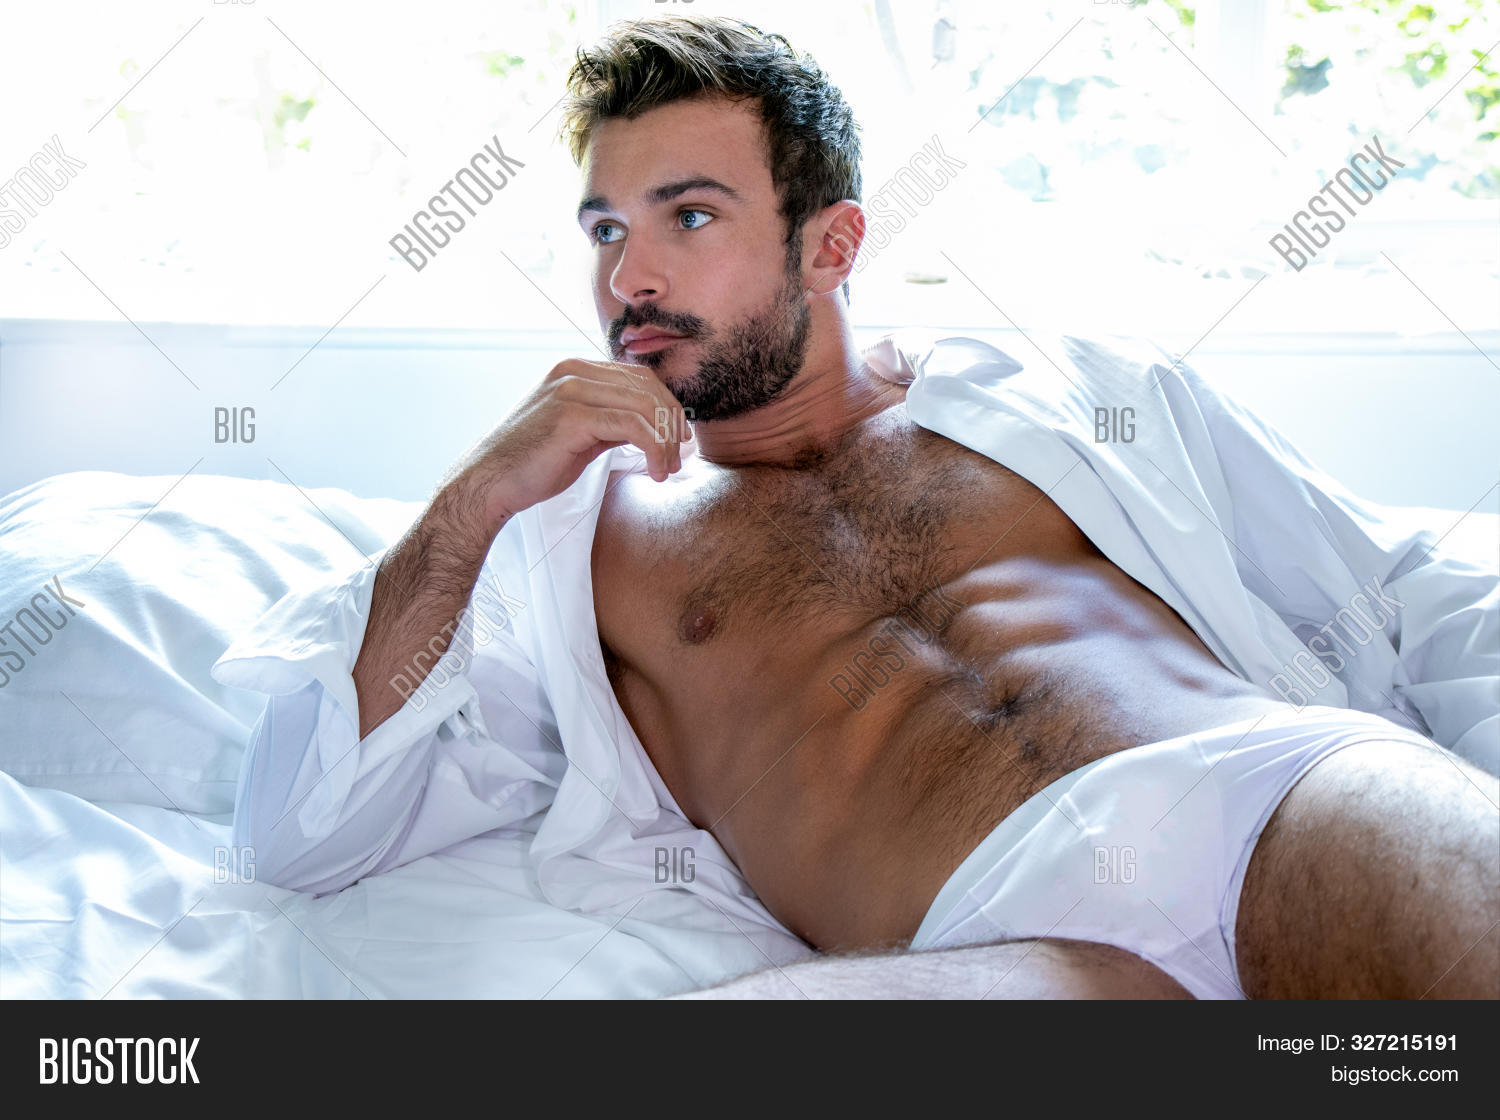 bill goebel recommends hot hairy men videos pic